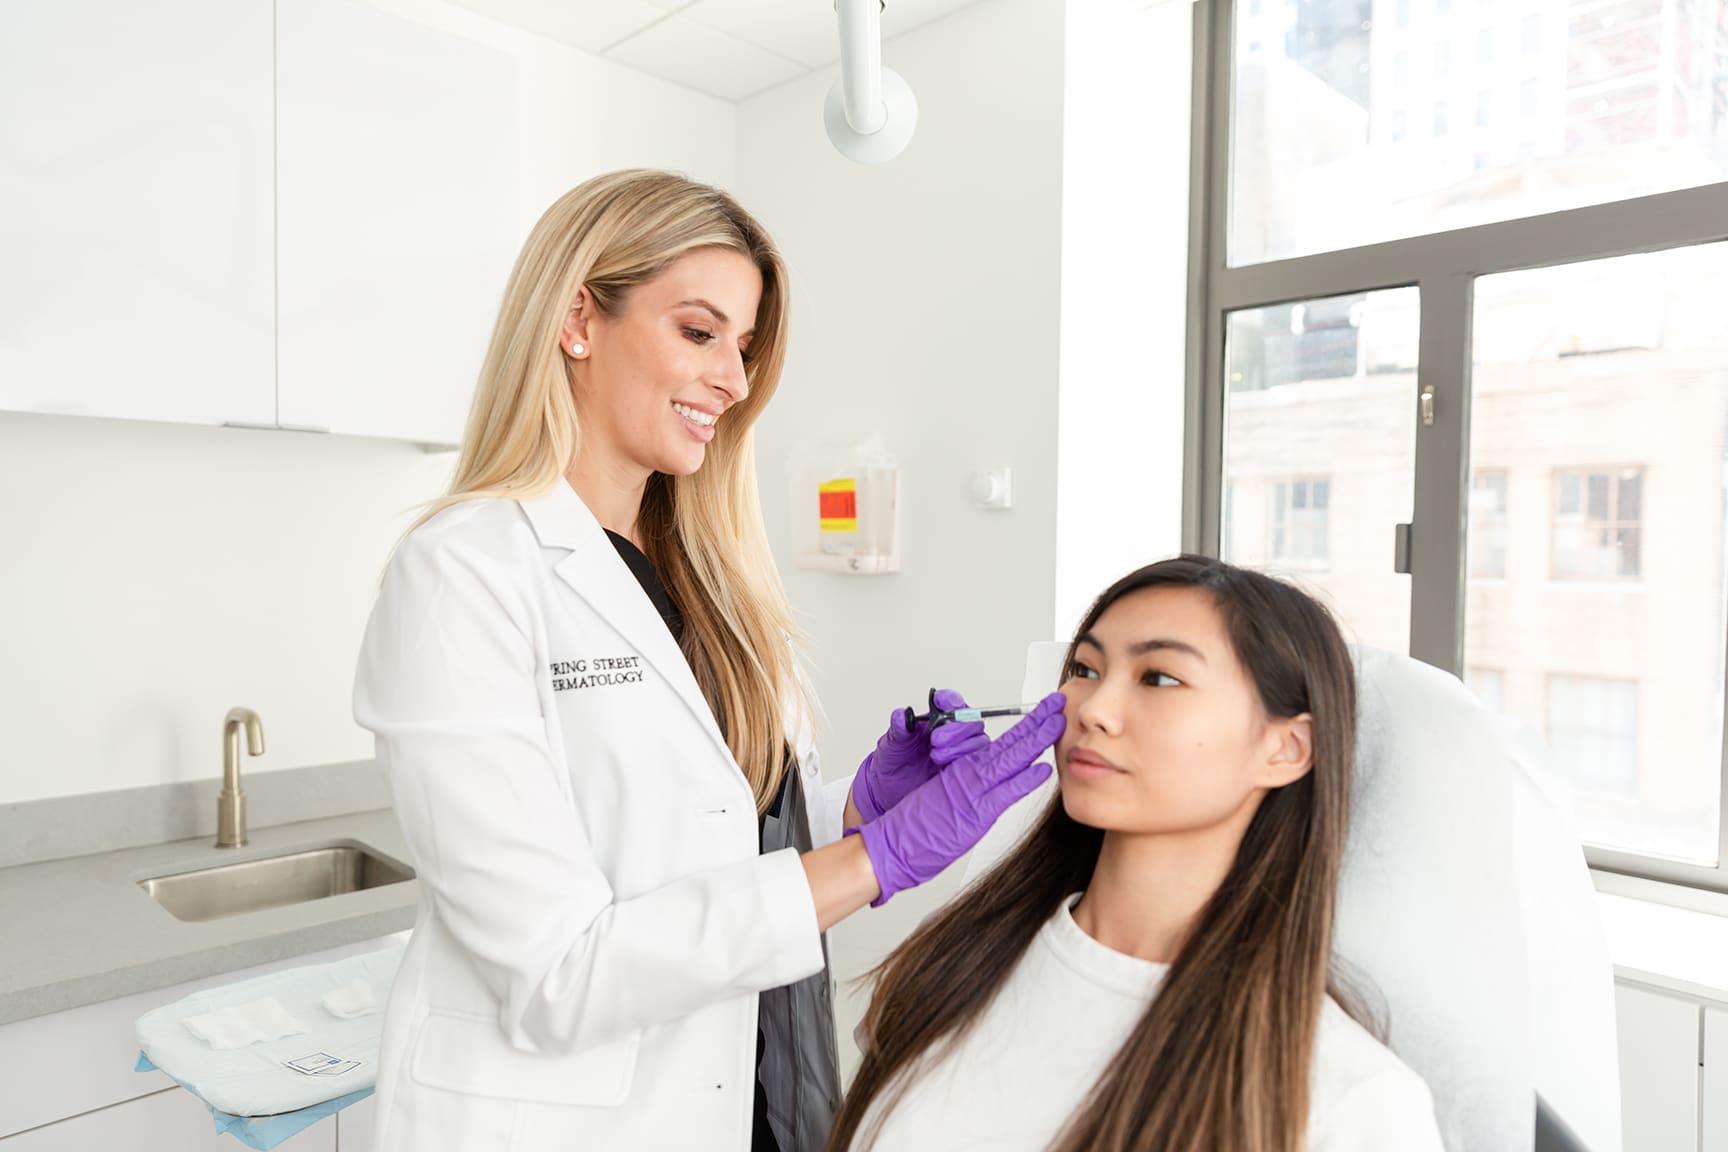 Image showing Board Certified Dermatologist Dr. Kaylan checking up the facial skin of a female patient in Spring Street Dermatology's Soho Location, New York City